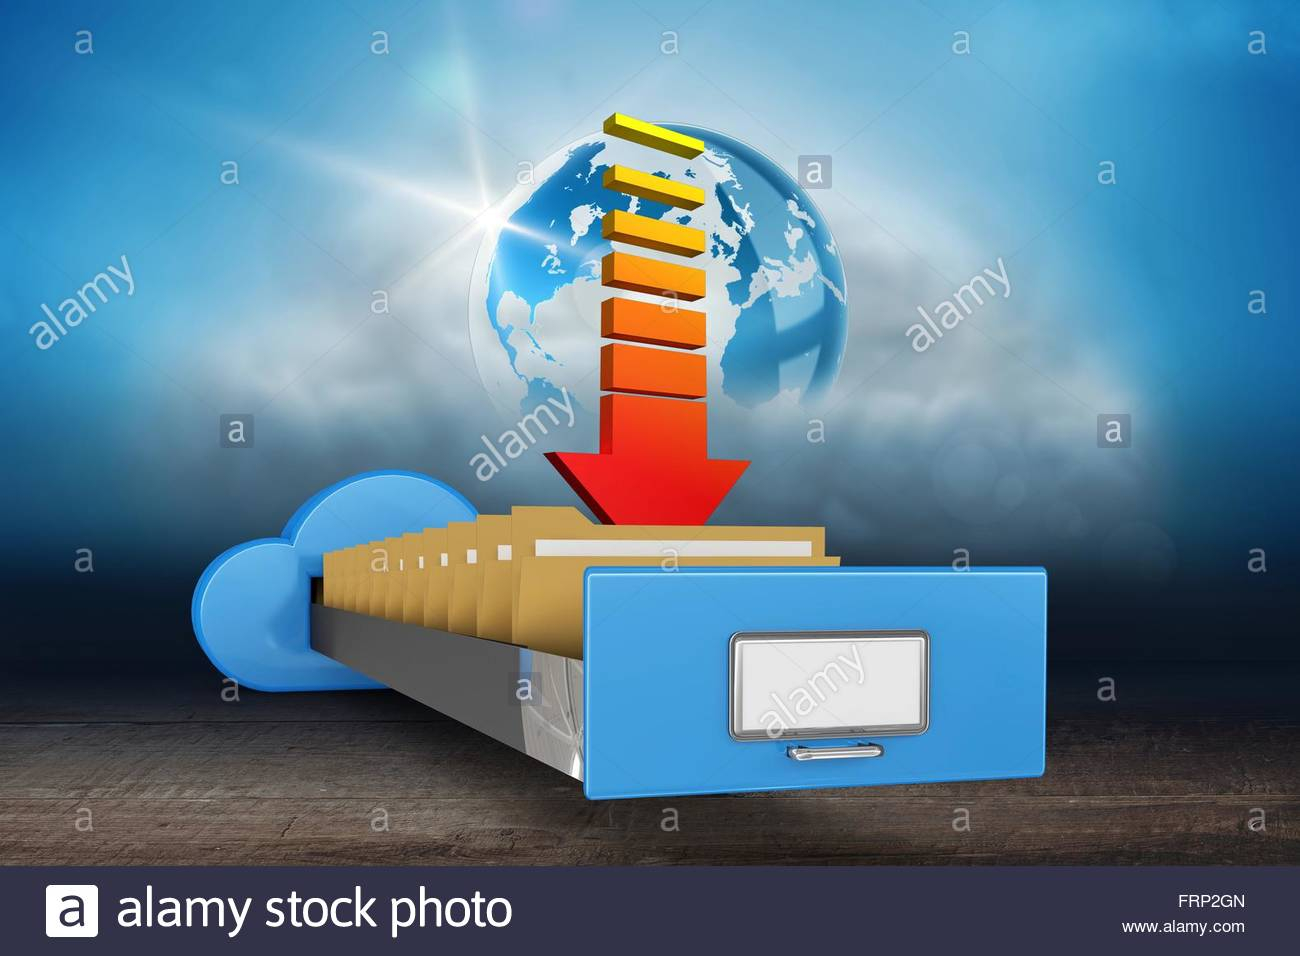 Cloud Filing Cabinet With Arrow Stock Photo 100673909 Alamy inside dimensions 1300 X 956